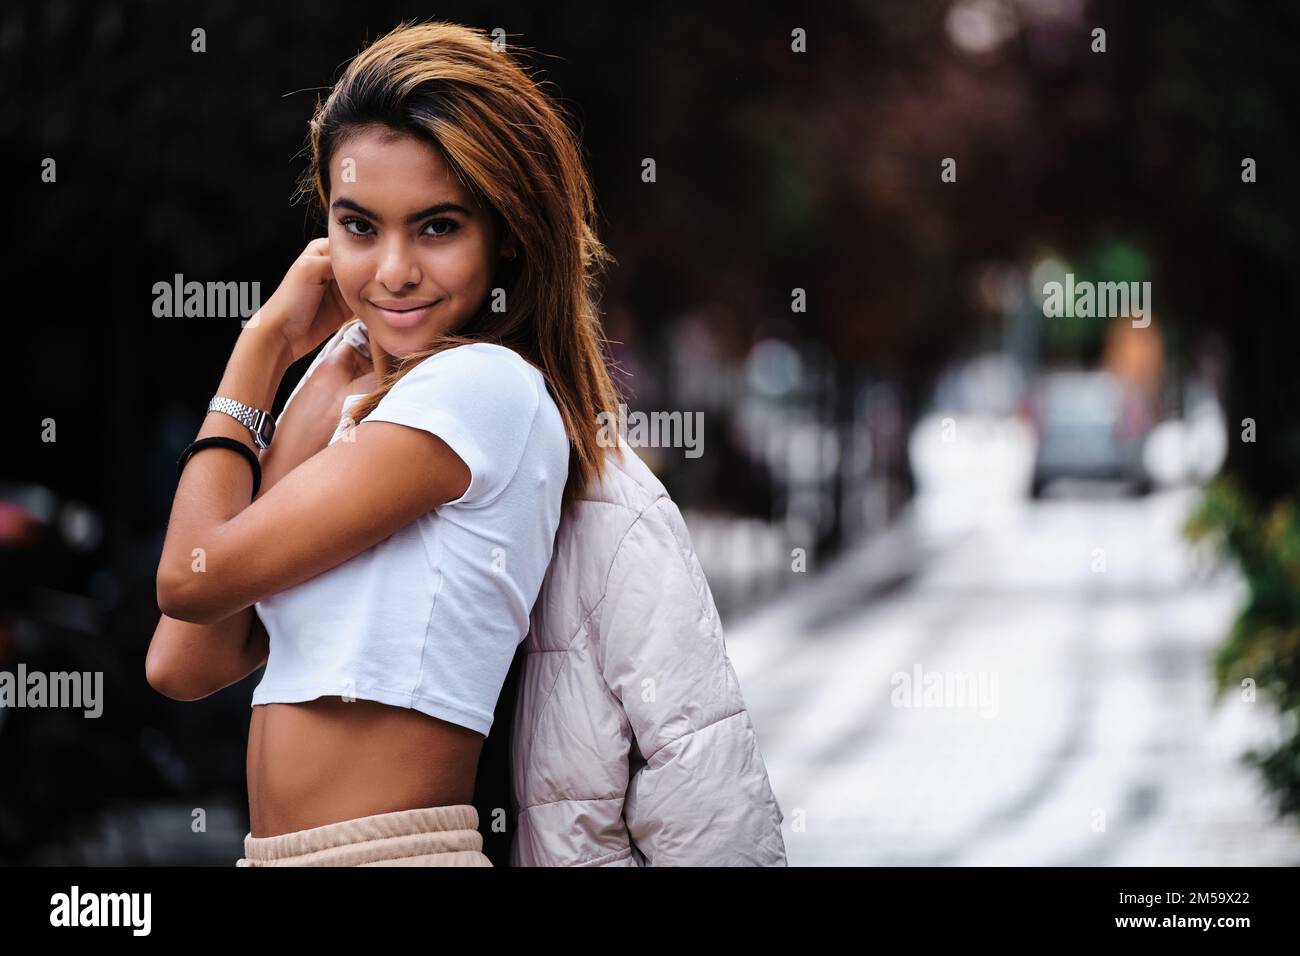 Young Moroccan woman looking at the camera while posing outdoors on the street. Stock Photo